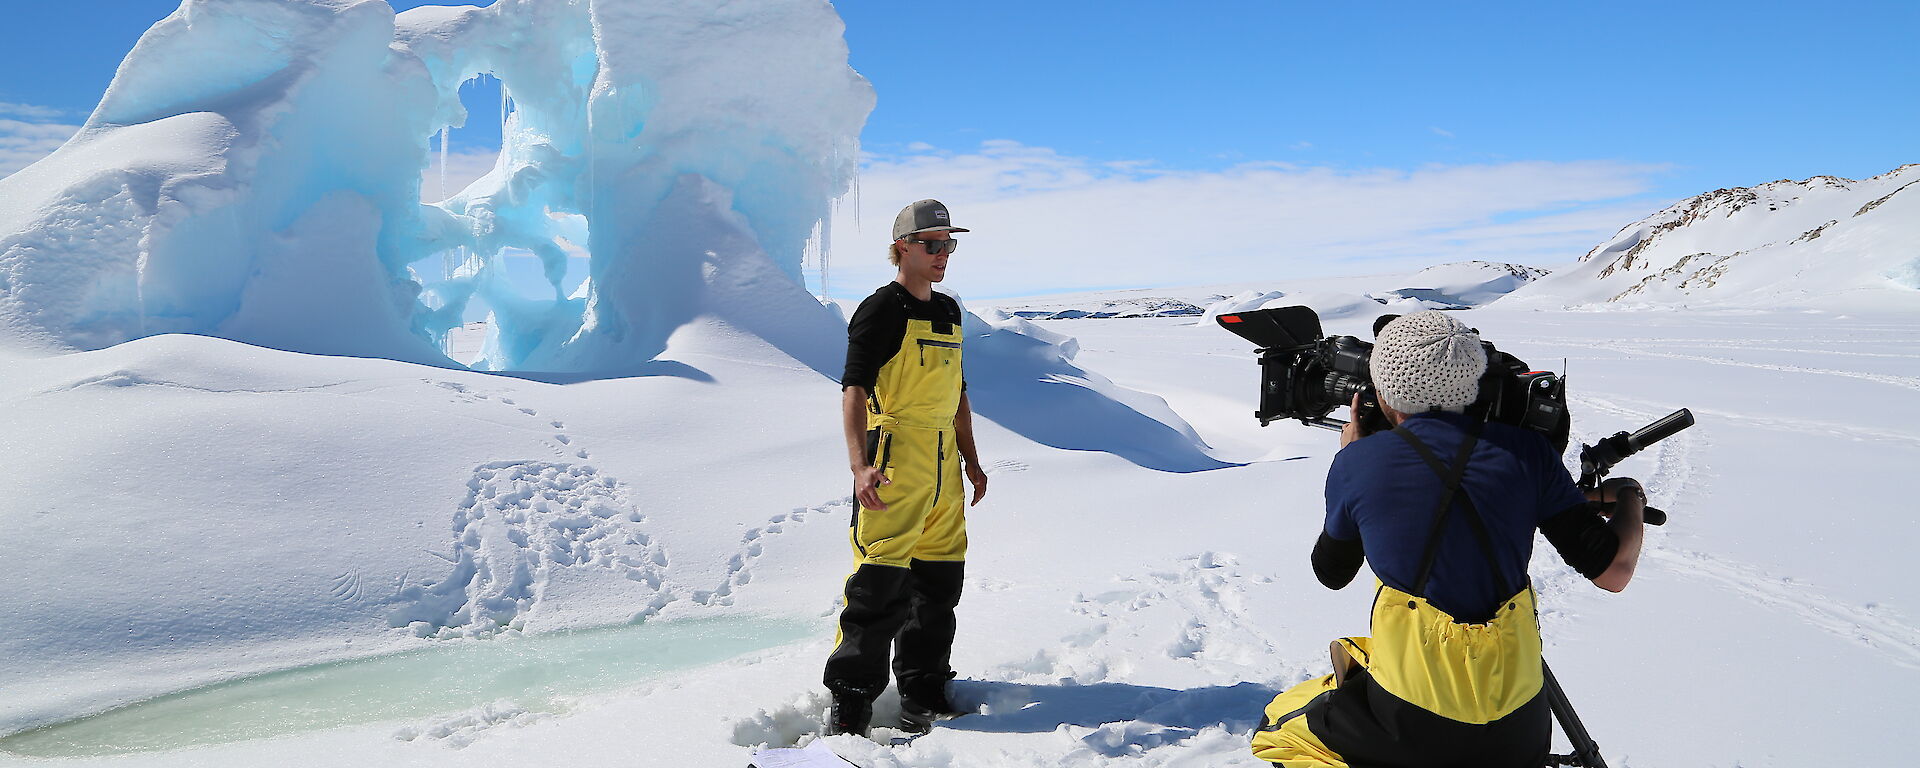 ABC3 presenter Kayne Tremills and cameraman Josh Zaini film a segment for the new Australian children’s television show Antarctica: Secrets of the Giant Freezer, standing in front of an ice formation